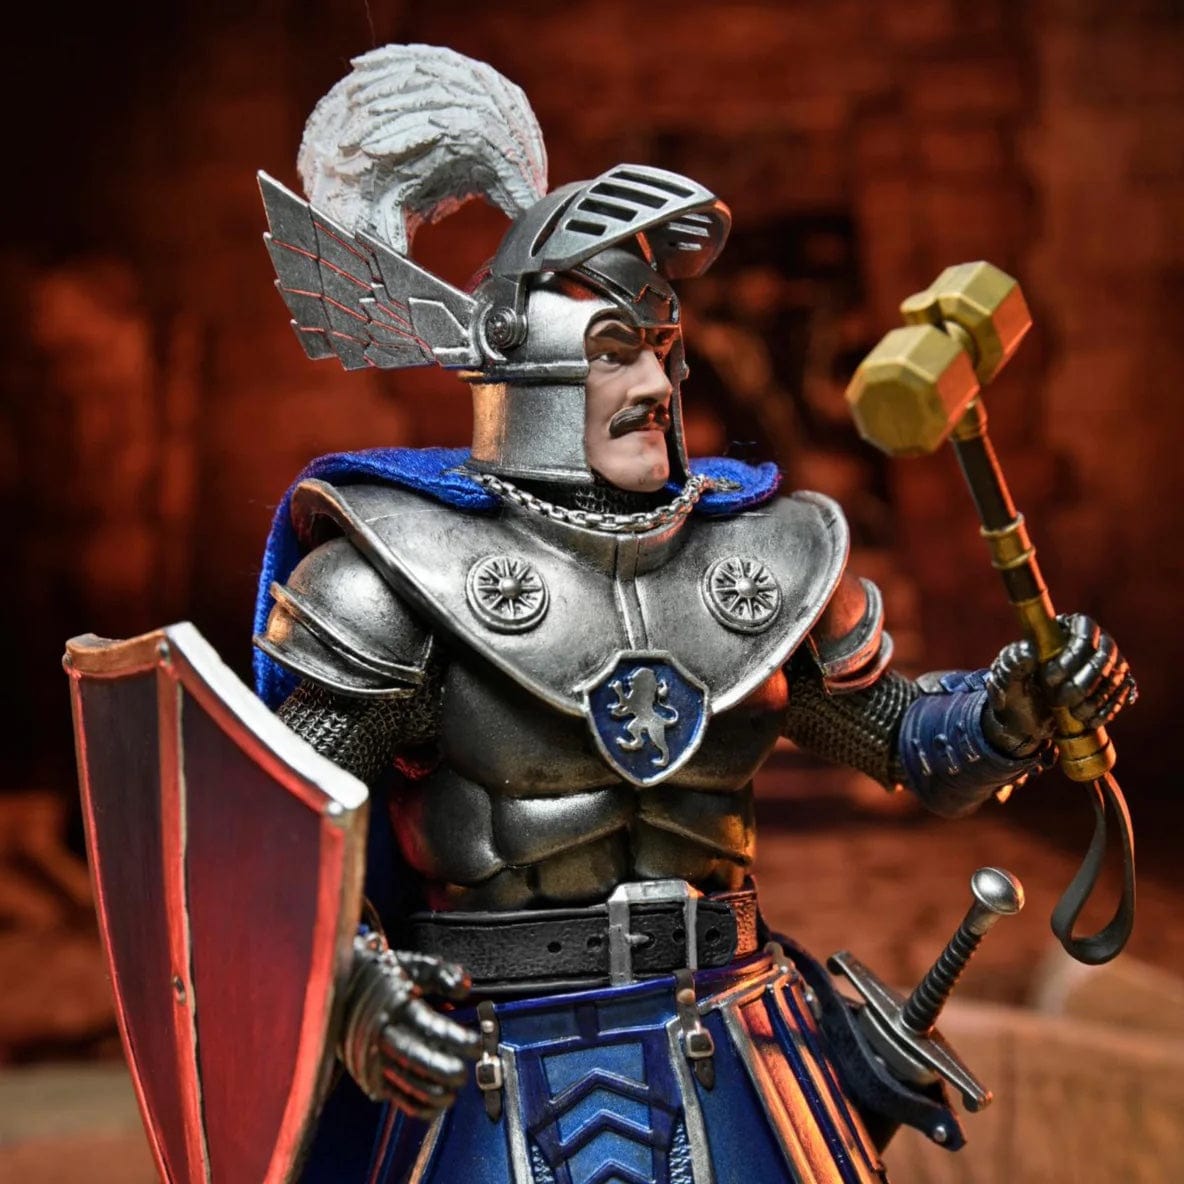 NECA Dungeons & Dragons Ultimate Strongheart Action Figure